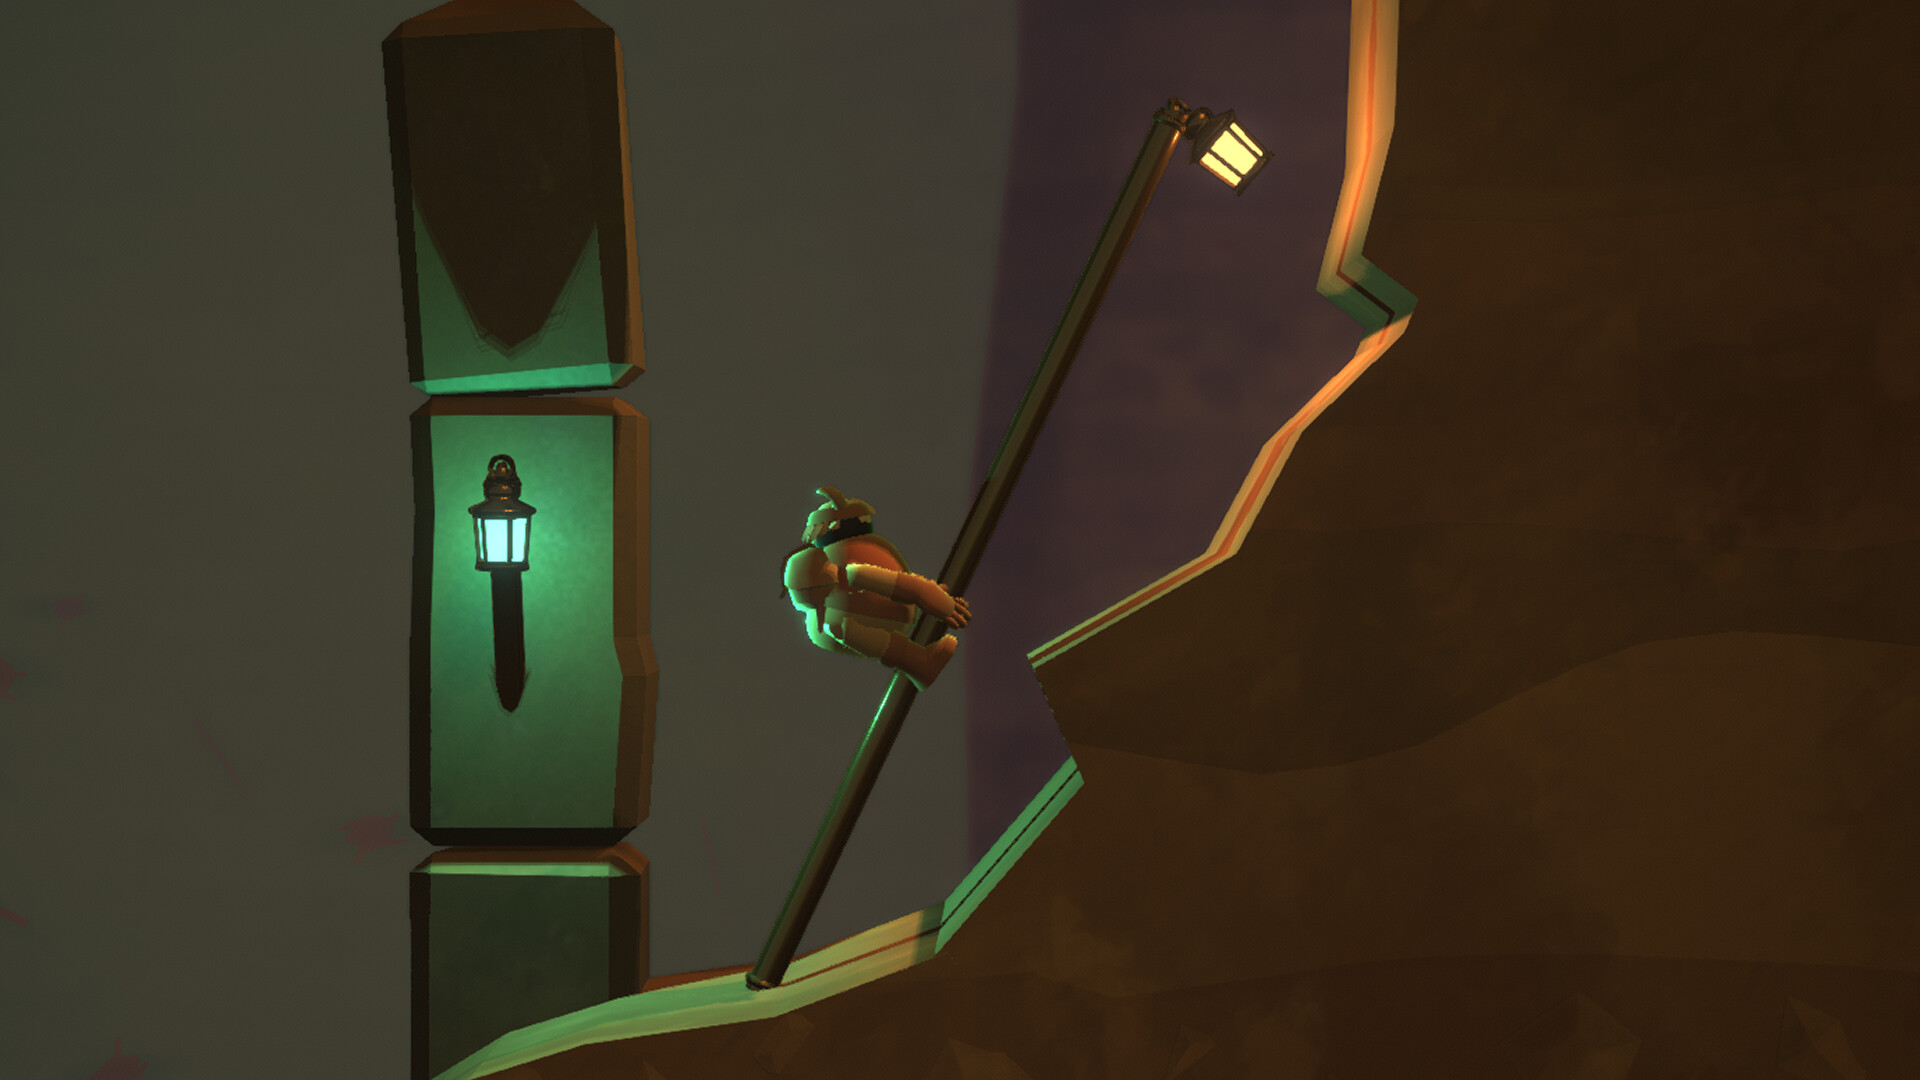 A difficult game about Climbing. A difficult game about climbing на телефон